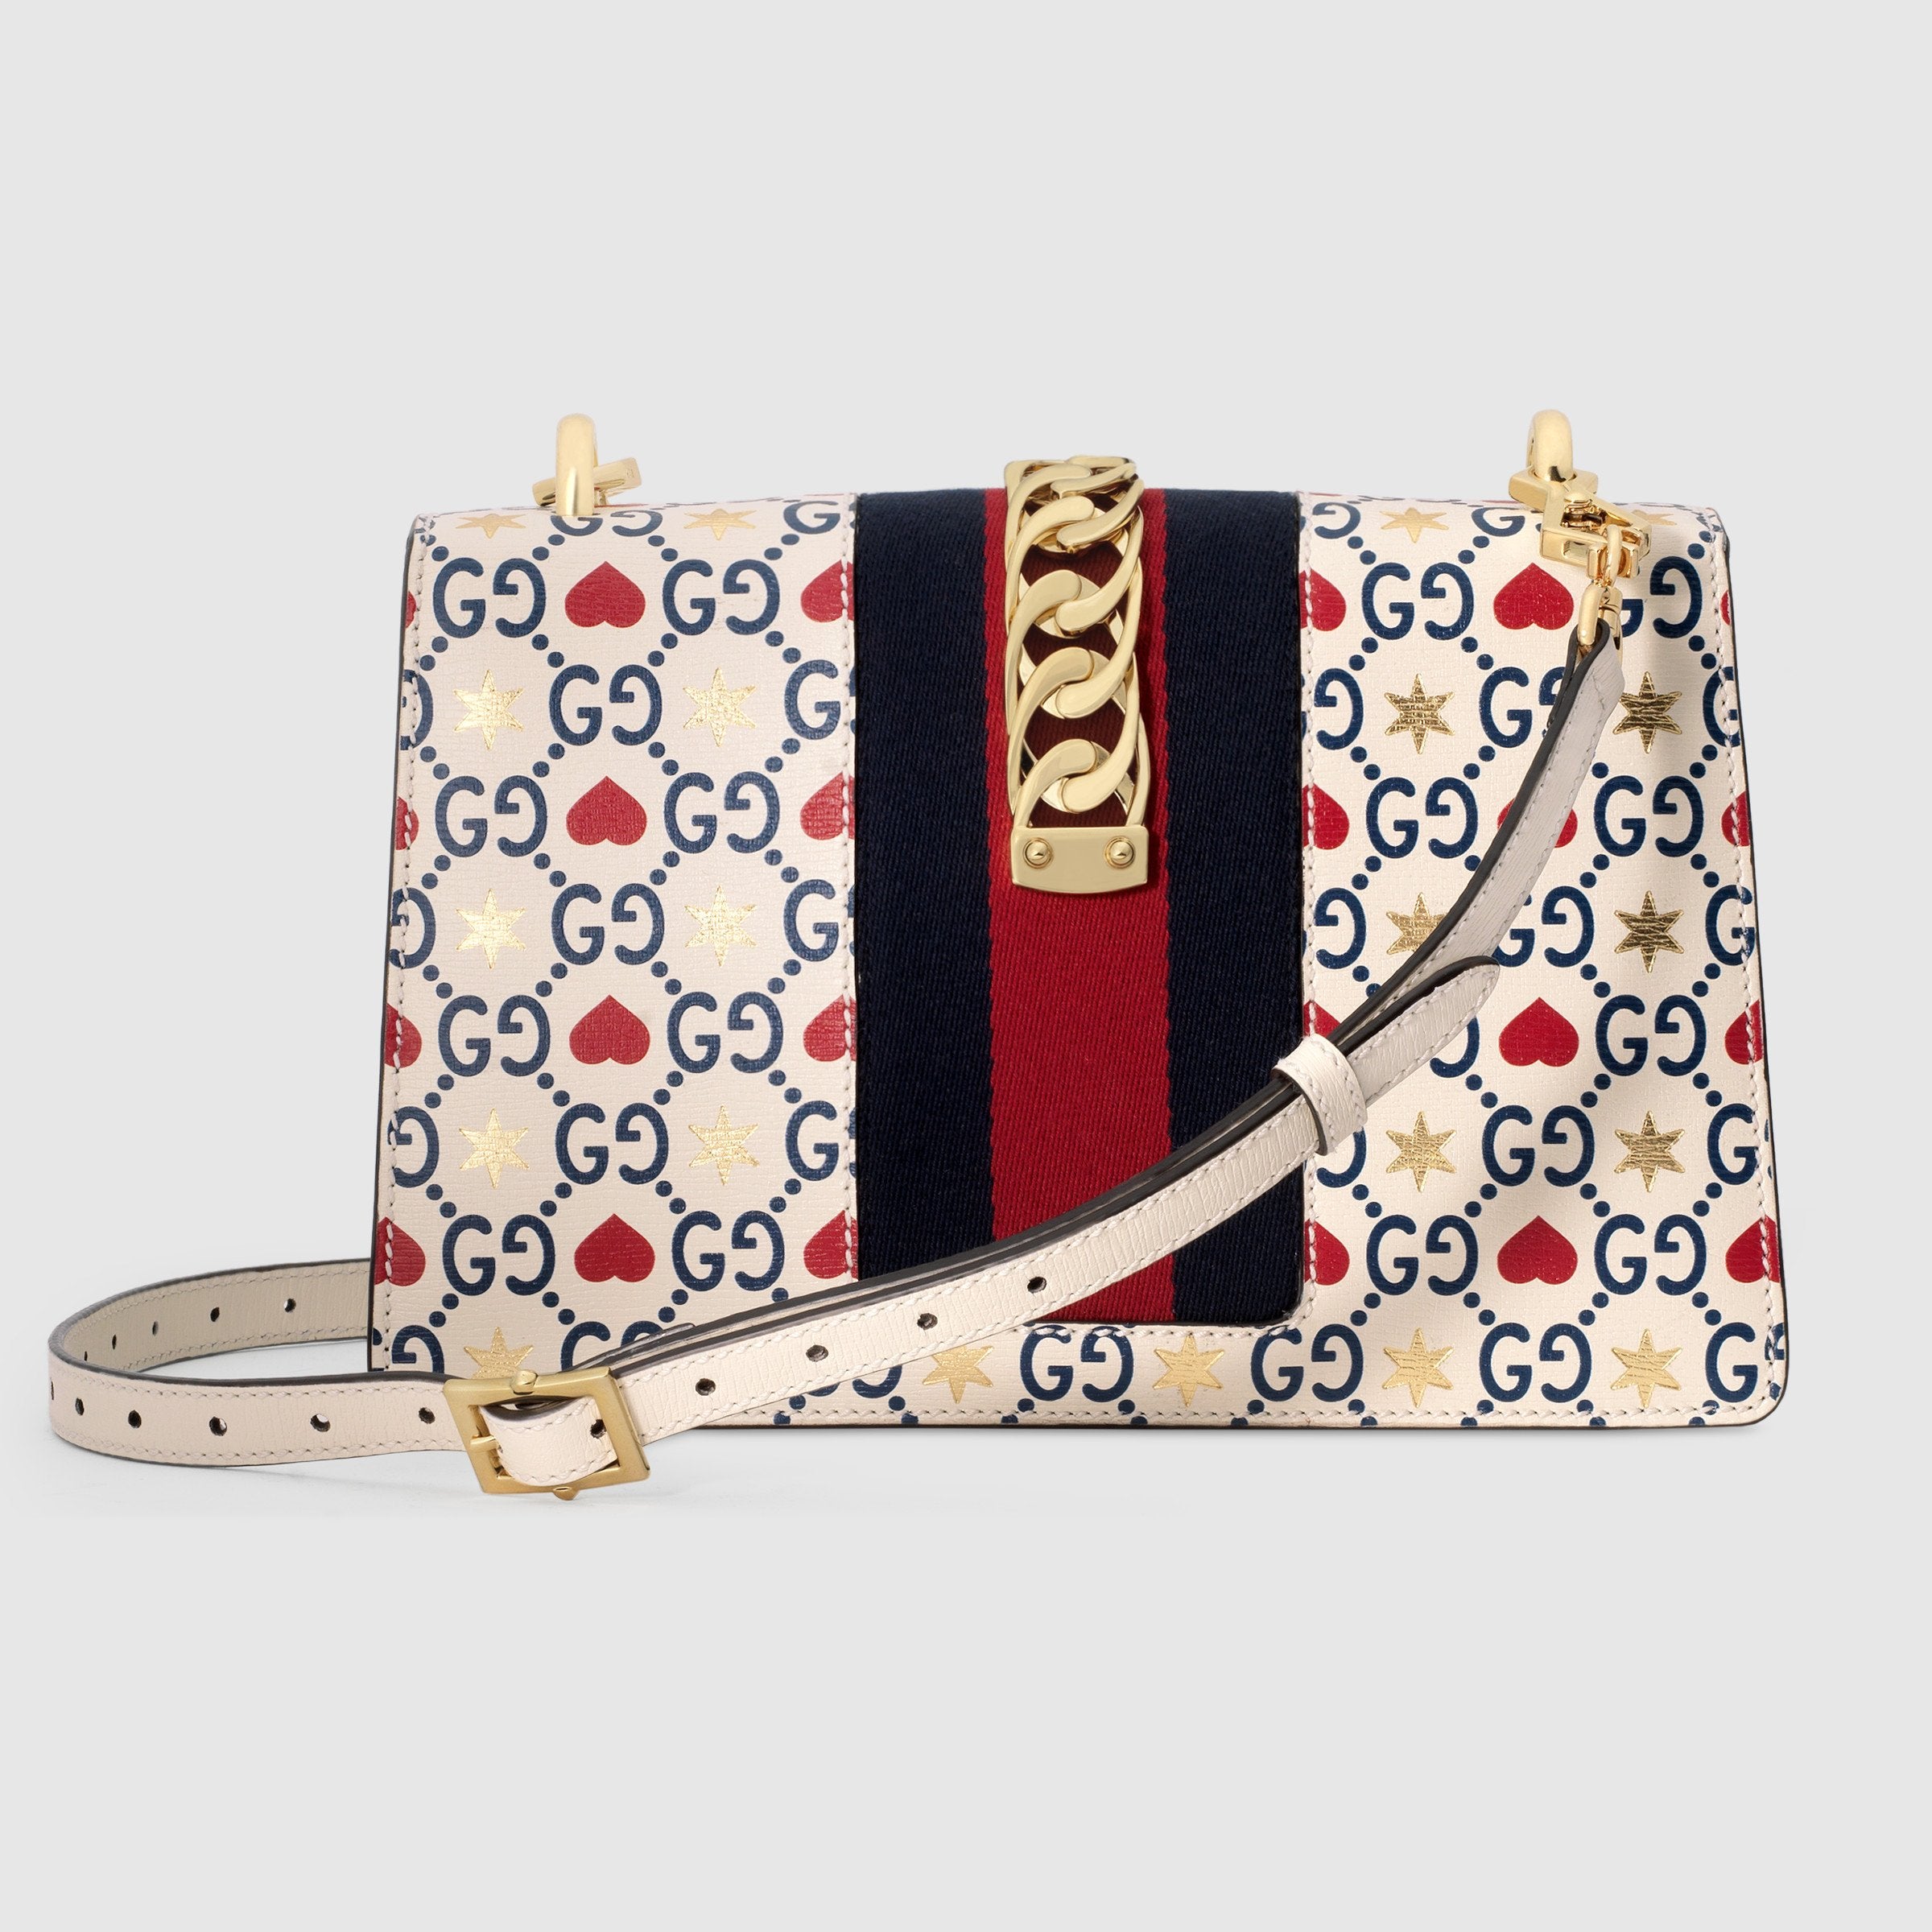 Gucci Chinese Valentine’s Day Sylvie Small Shoulder Bag